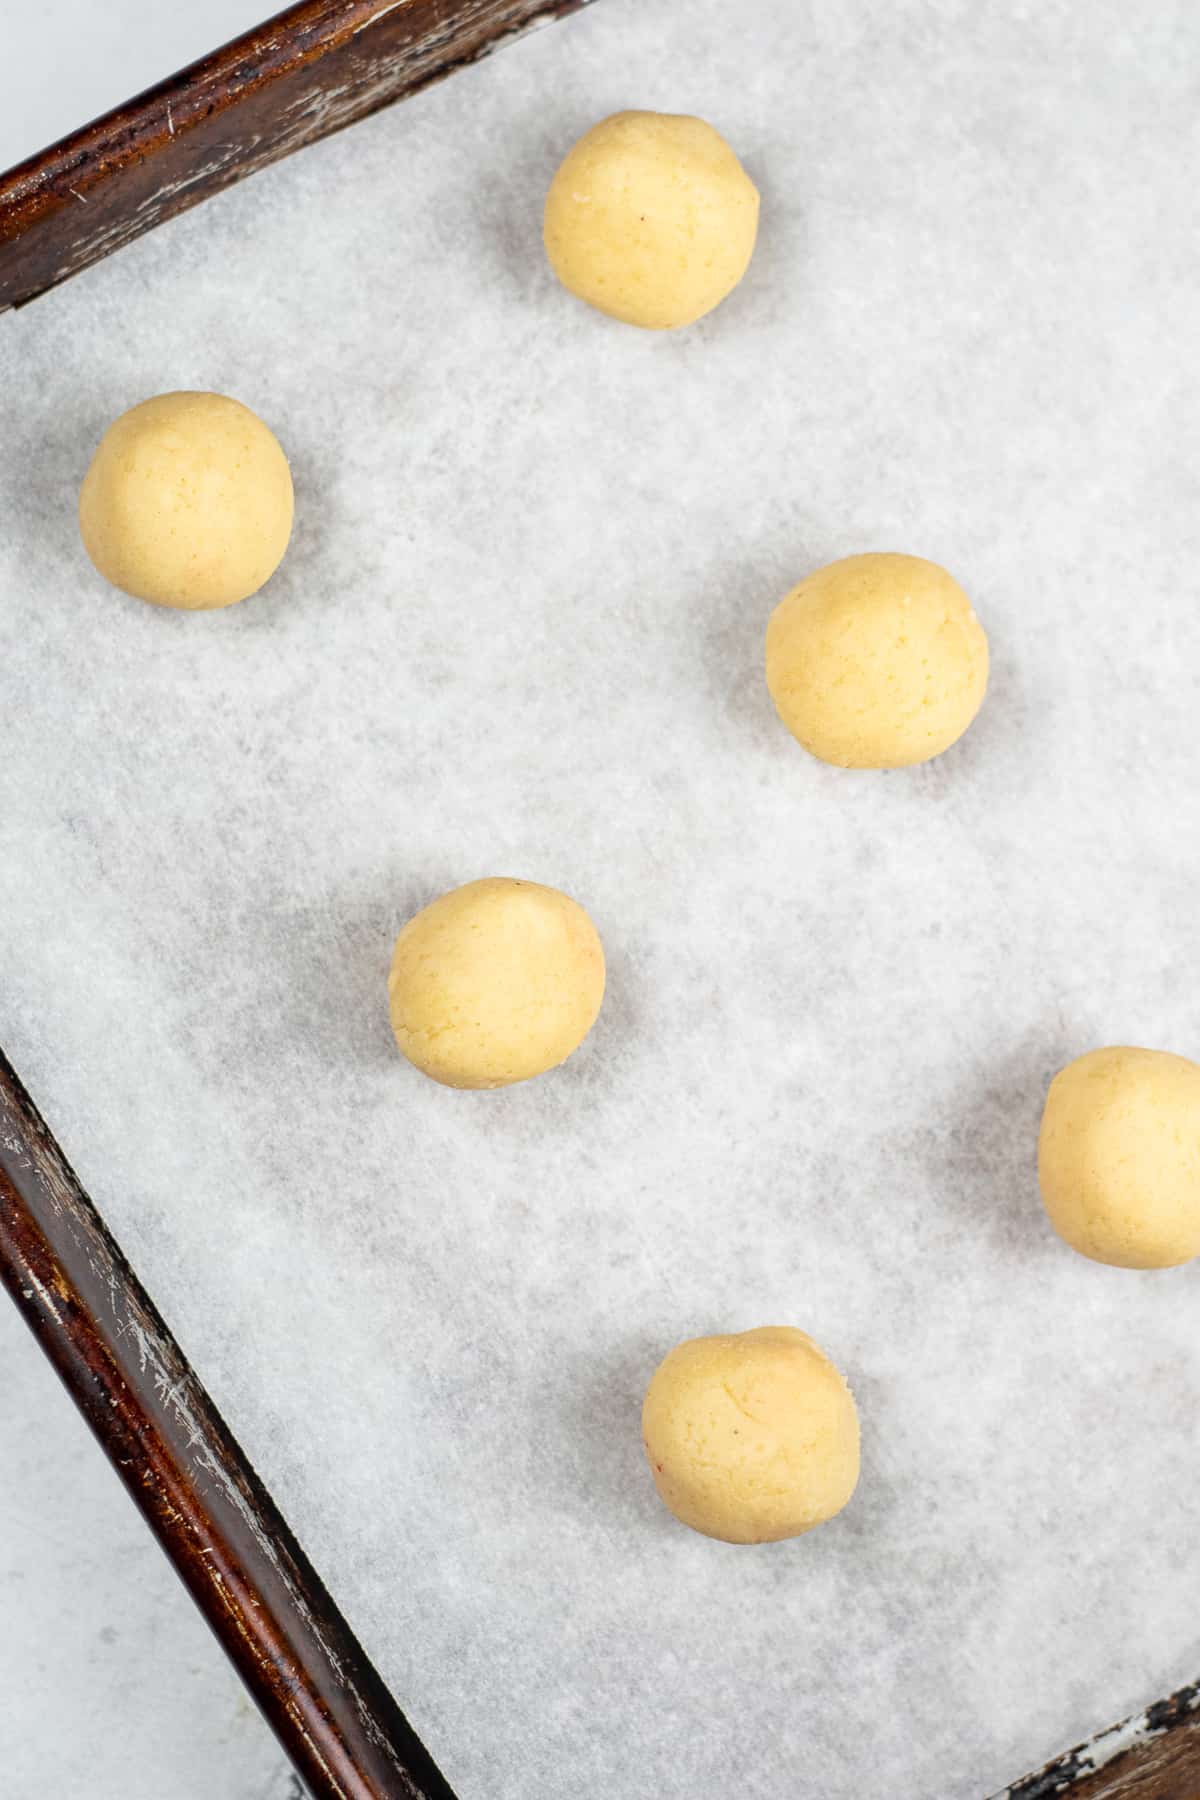 Cookie dough balls spaced out on a baking sheet lined with parchment paper from above.